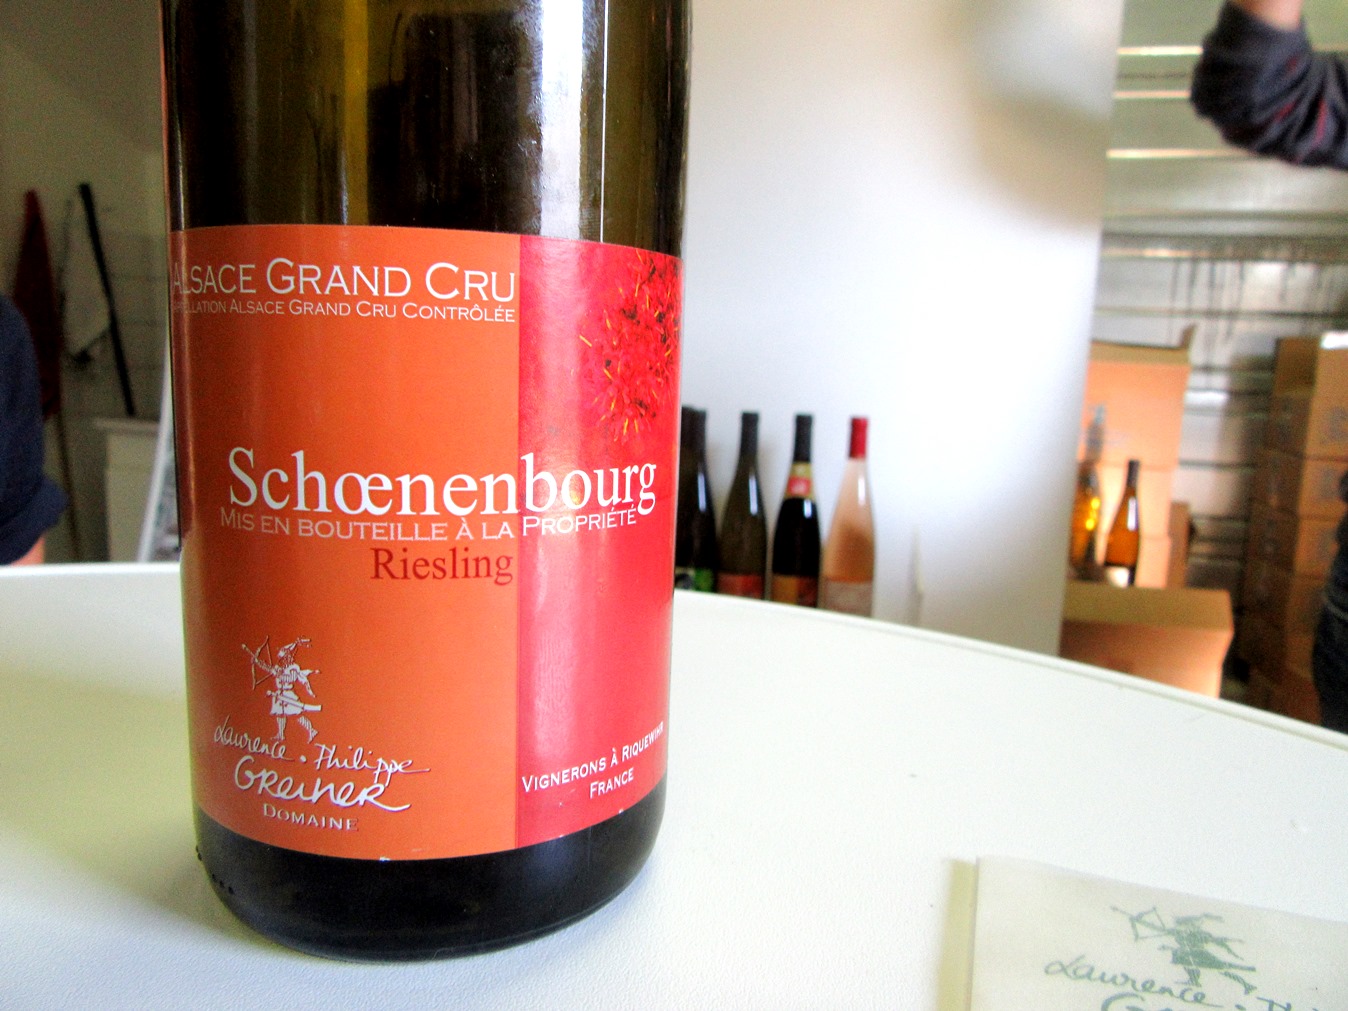 Domaine Laurence Phillipe Greiner, Schoenenbourg Riesling 2013, Alsace Grand Cru, France, Wine Casual